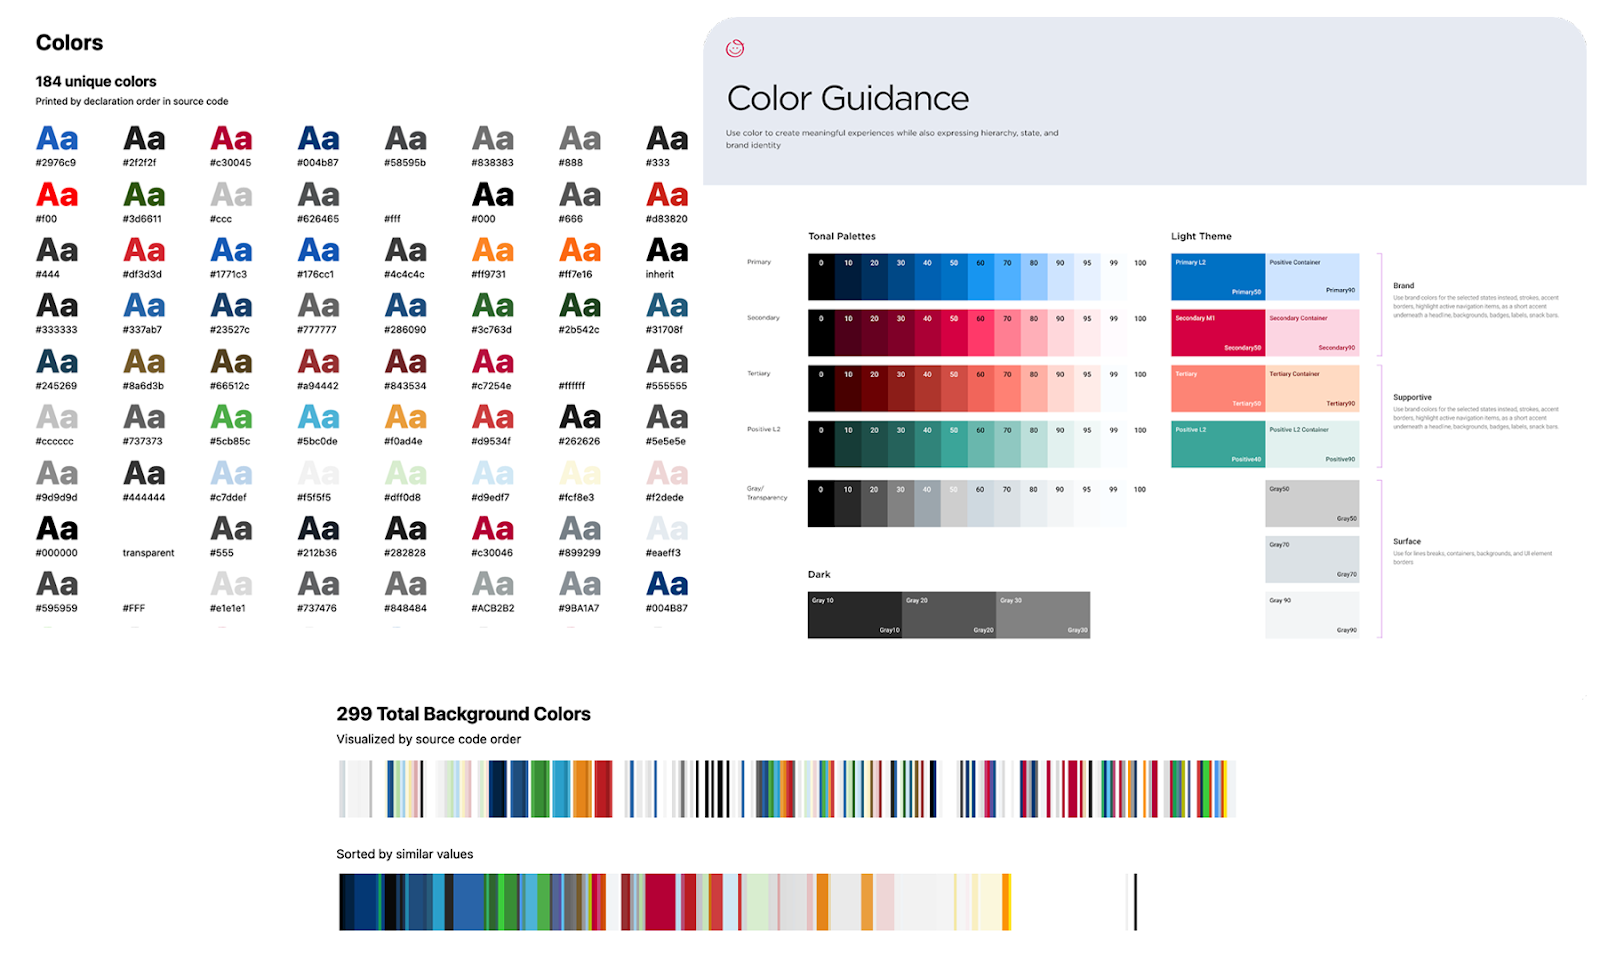 A before-and-after comparison of the company’s color palette before a design system was created. The left side of the image shows the before version with dozens of unique color samples employed on a capitalized and lowercase letter “A,” with the color’s hex code below the letters. The bottom of the image shows the 299 original background colors in the palette on color spectrums. On the right side of the image is the palette after the design system was created. It is titled “Color Guidance,” with text below the title reading “Use color to create meaningful experiences while also expressing hierarchy, state, and brand identity.” Below that are “Tonal Palettes,” including “Primary,” “Secondary,” “Tertiary,” “Positive L2,” and “Gray/Transparency.” There are also “Light Theme” colors and “Dark” colors included in the palette.